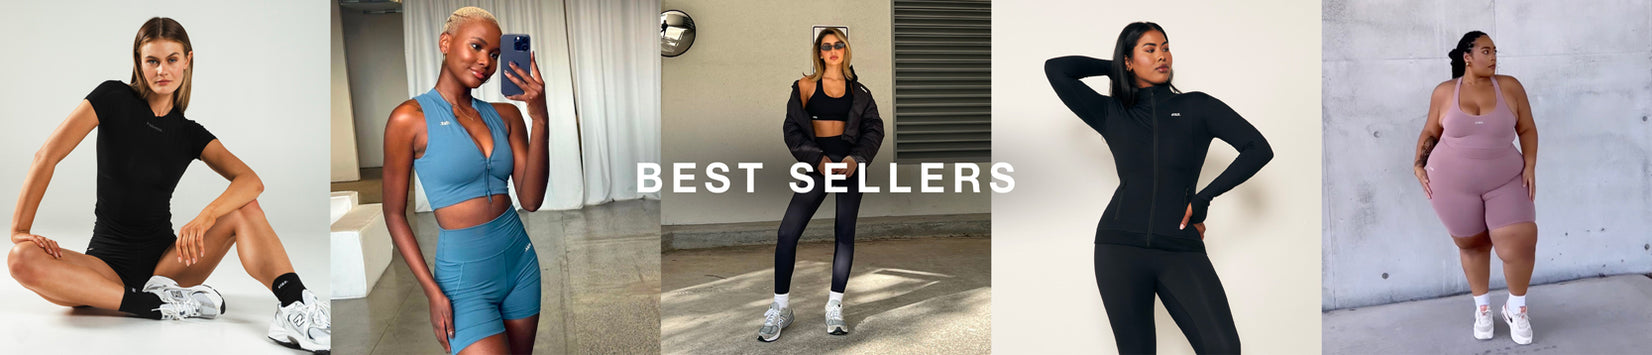 best seller workout fitness gym active